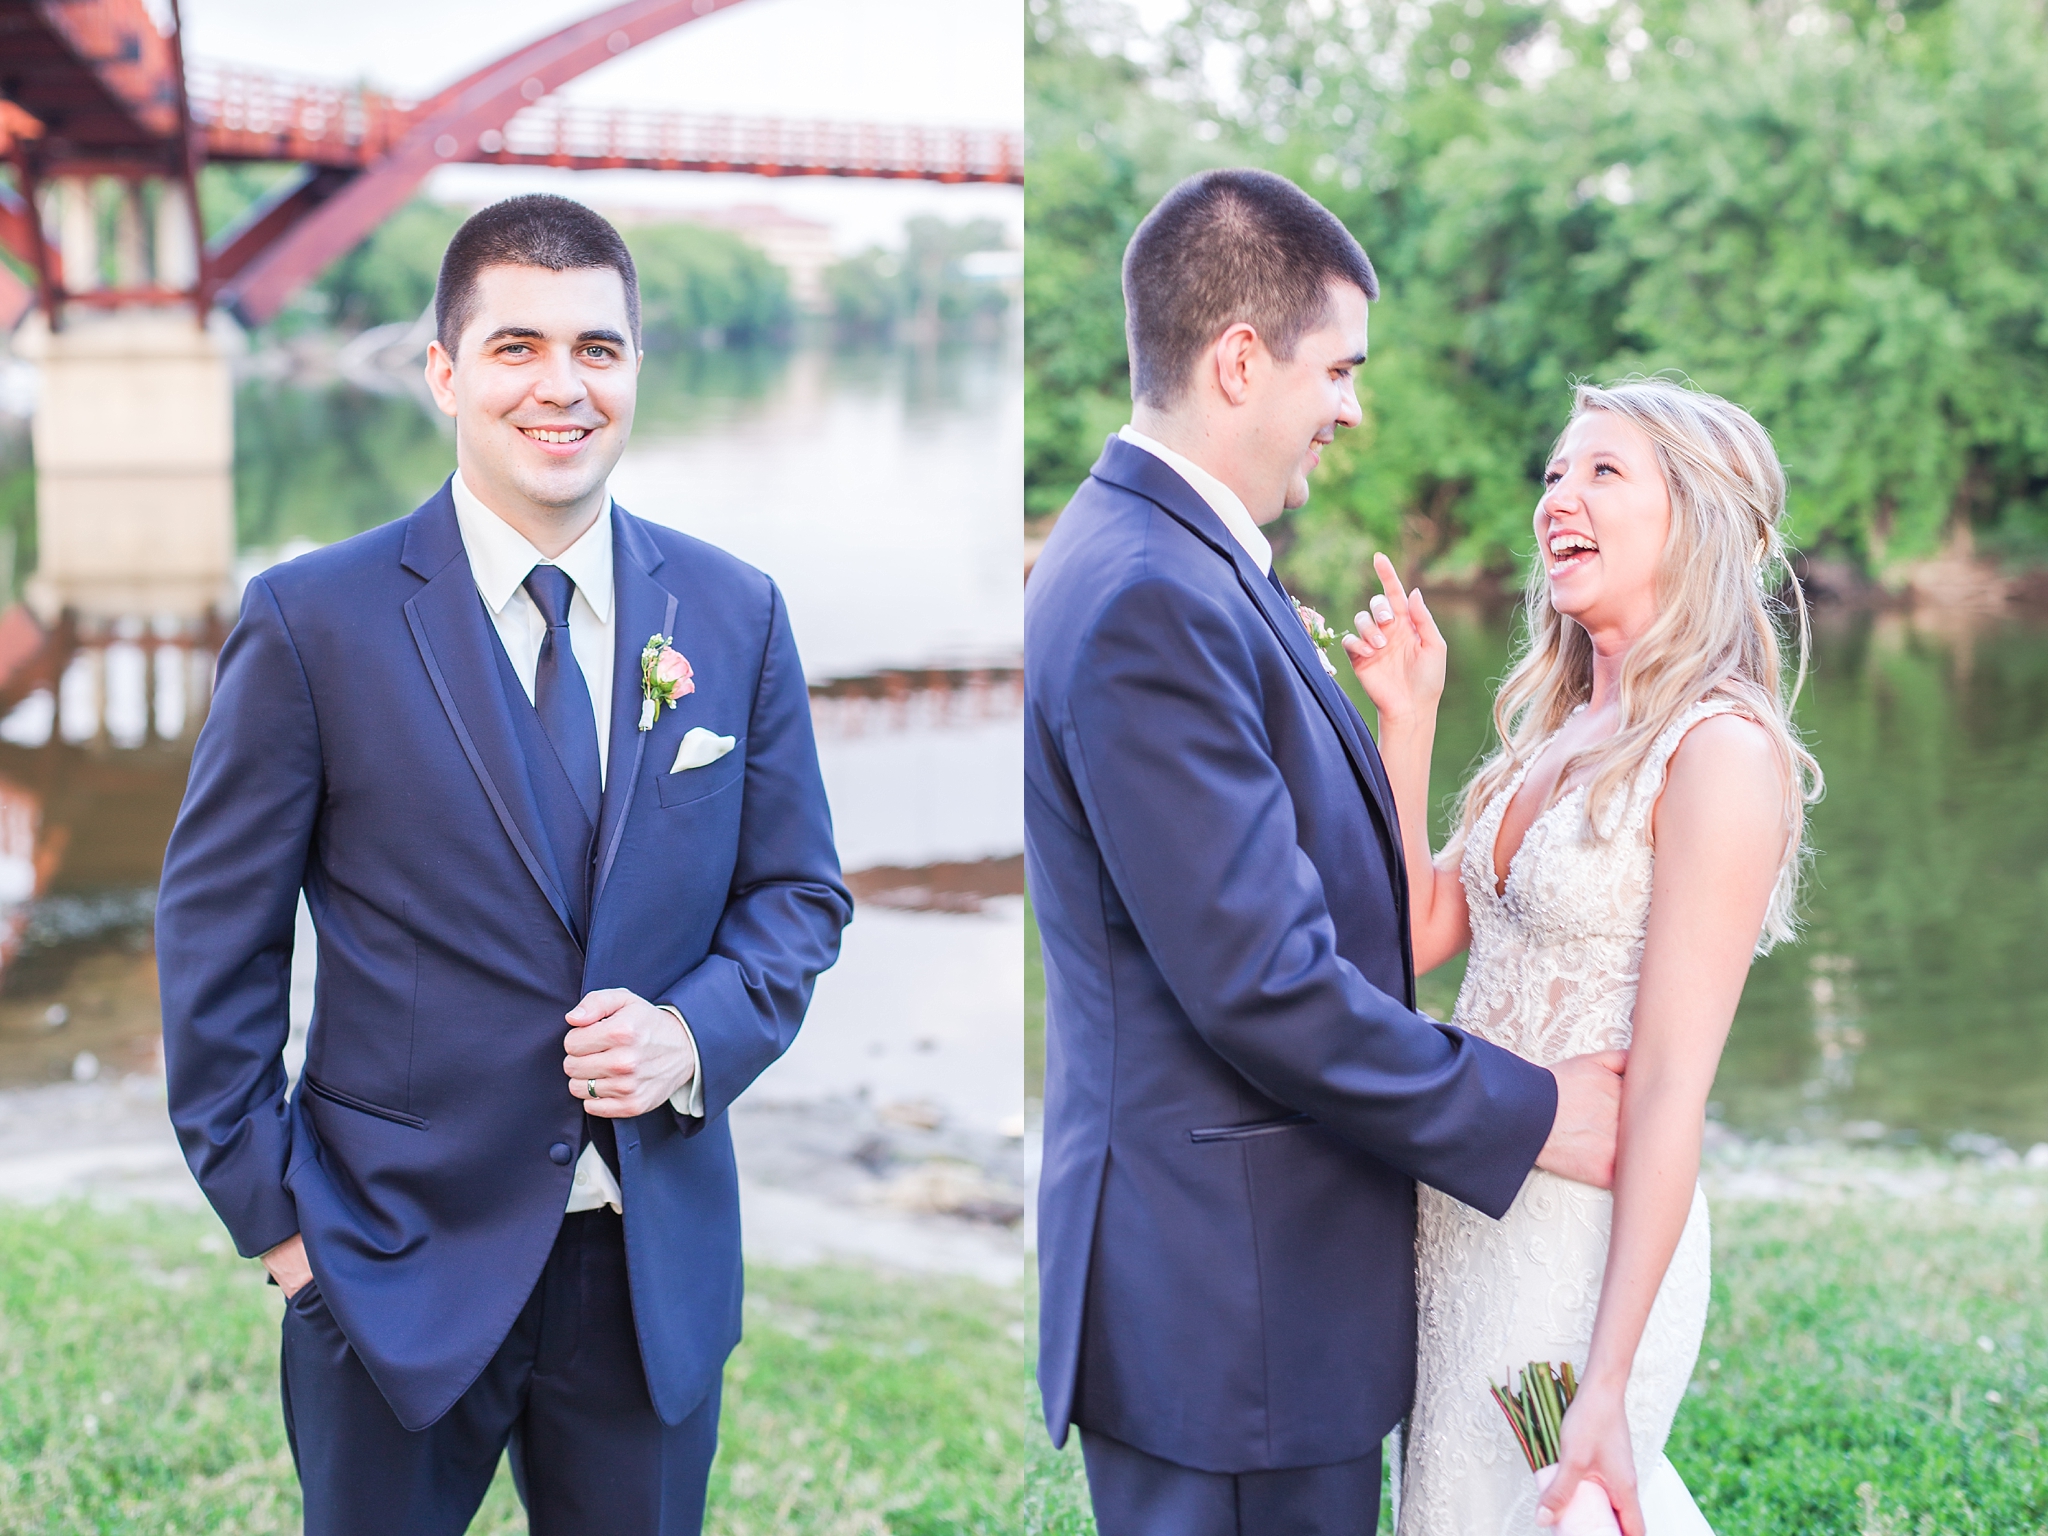 candid-romantic-wedding-photos-at-the-h-hotel-in-midland-michigan-by-courtney-carolyn-photography_0098.jpg